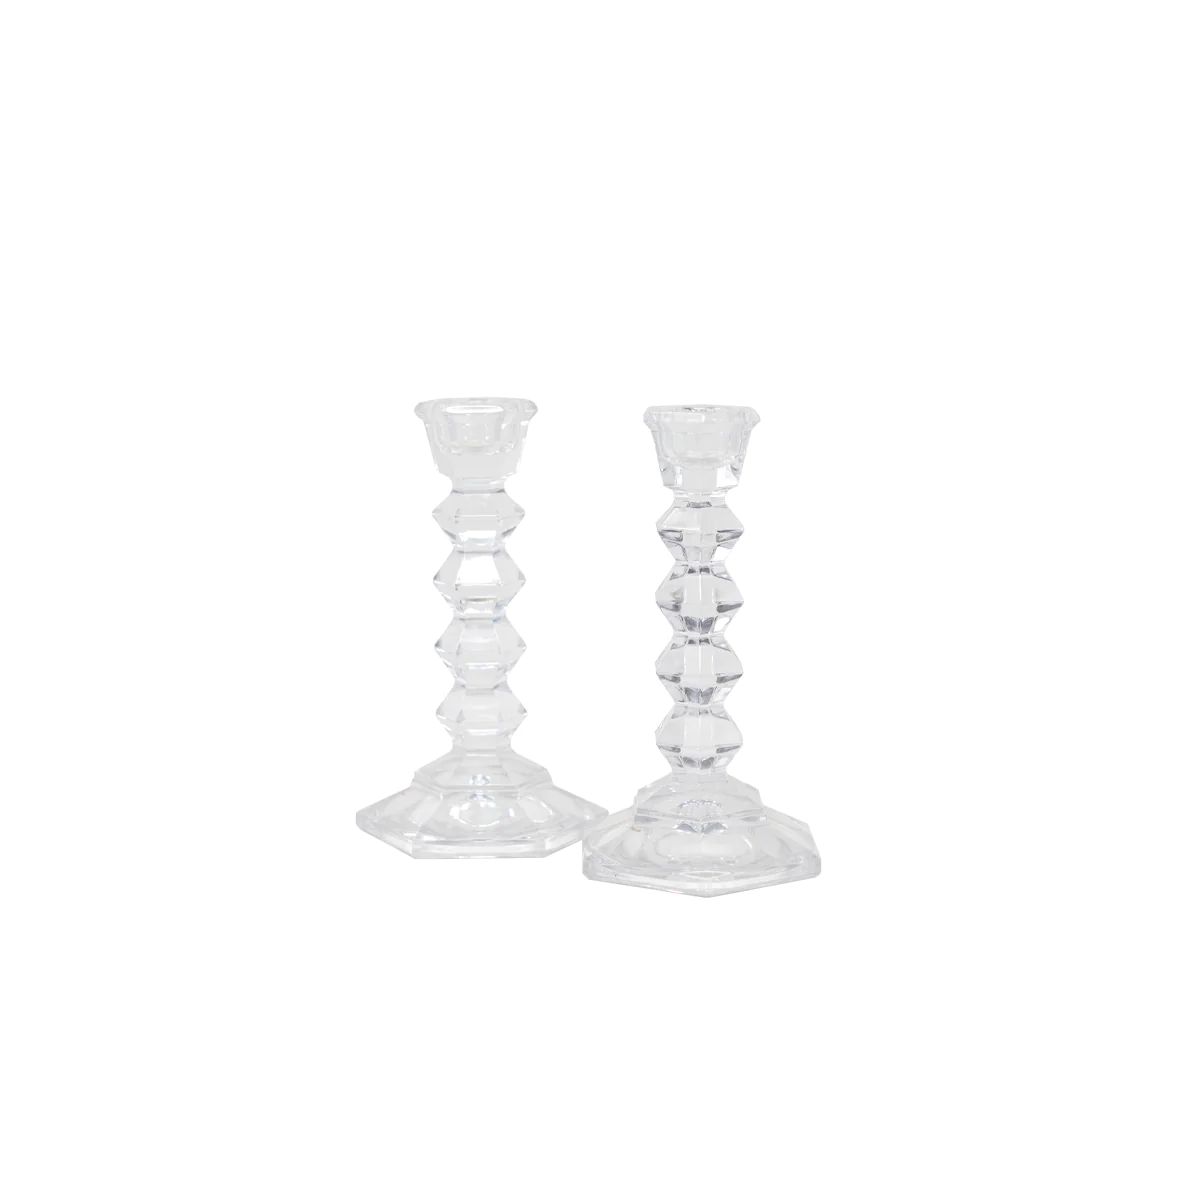 Vintage Faceted Candleholder Pair | Tuesday Made